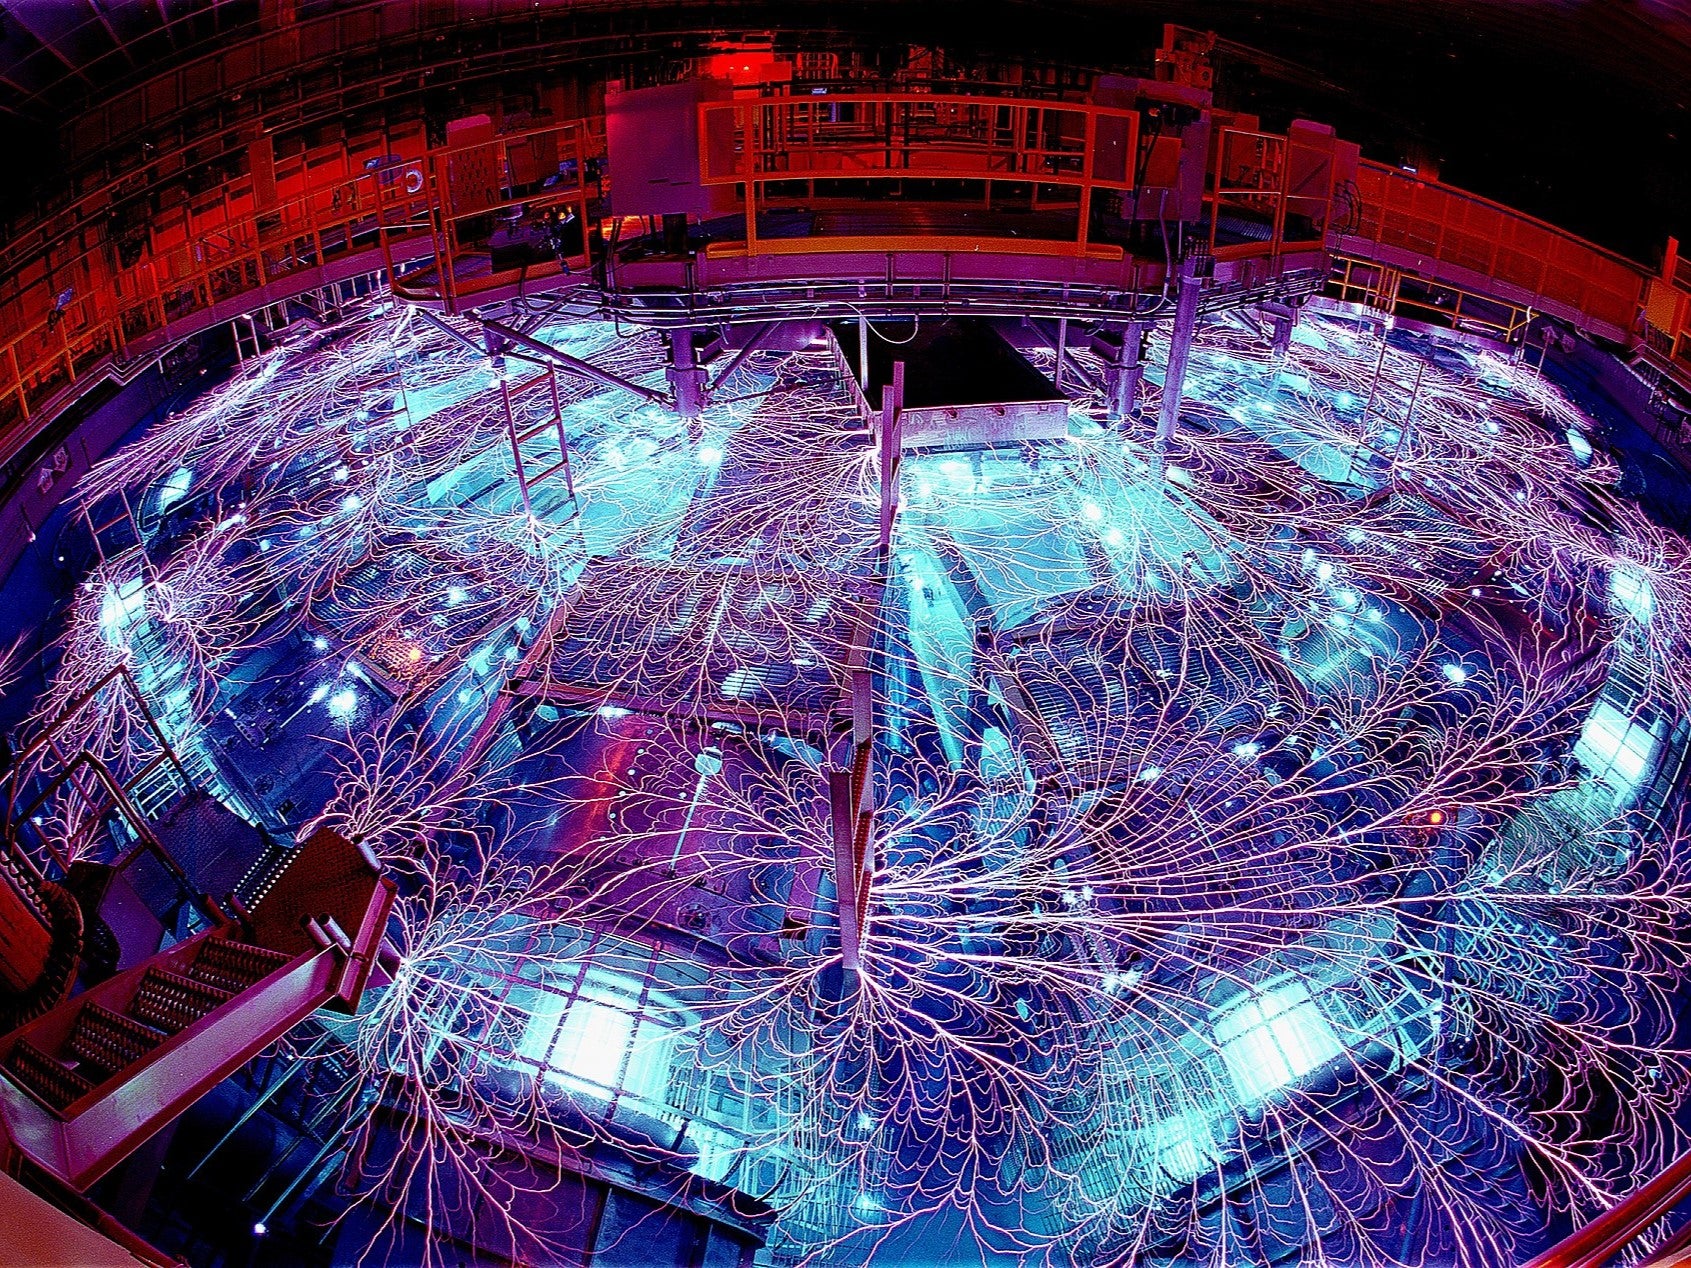 A Z-Pulse machine, like this one pictured at Sandia National Laboratory in the US, can generate huge electric pulses